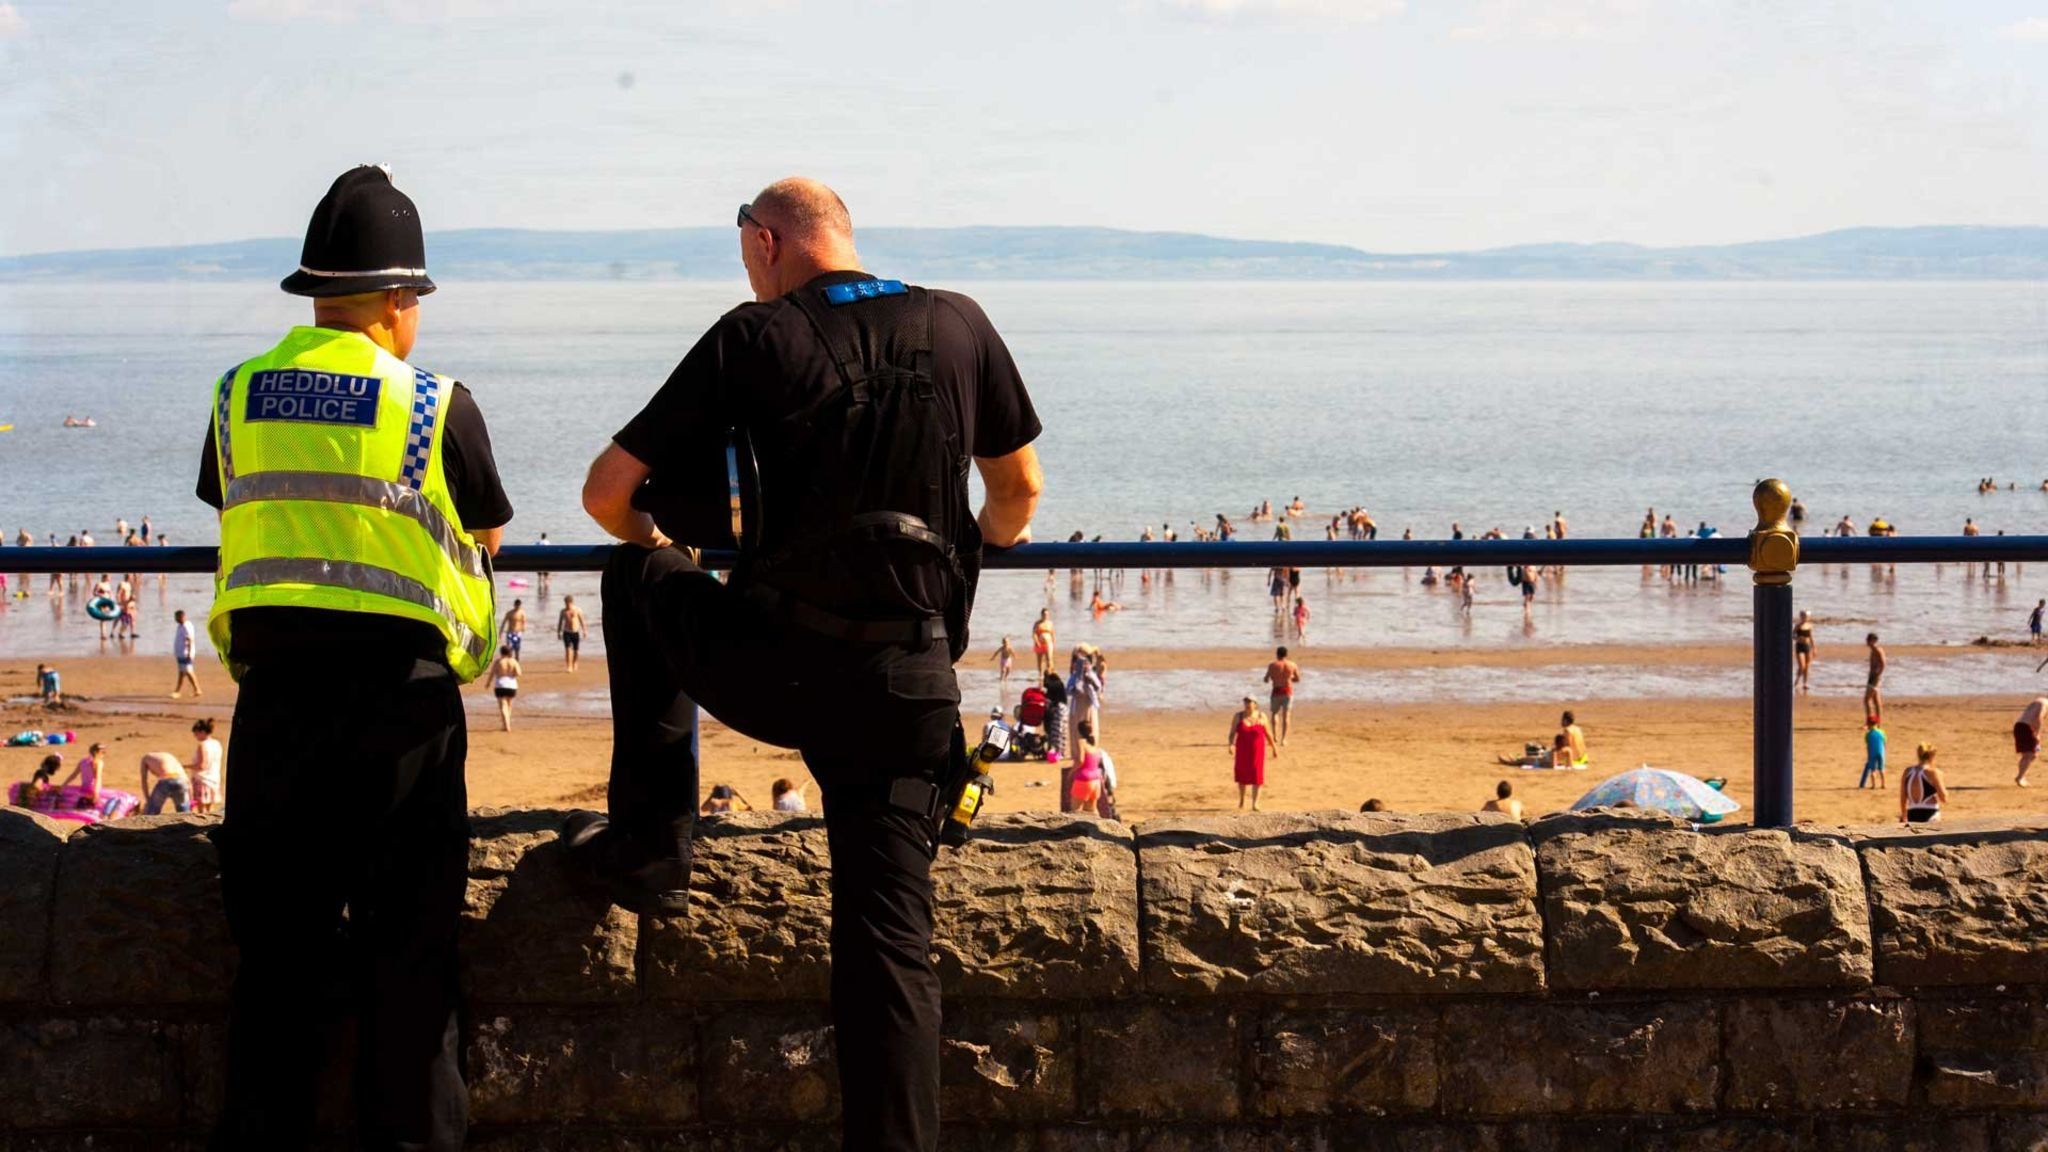 Heatwave: Is there more crime in hot weather?